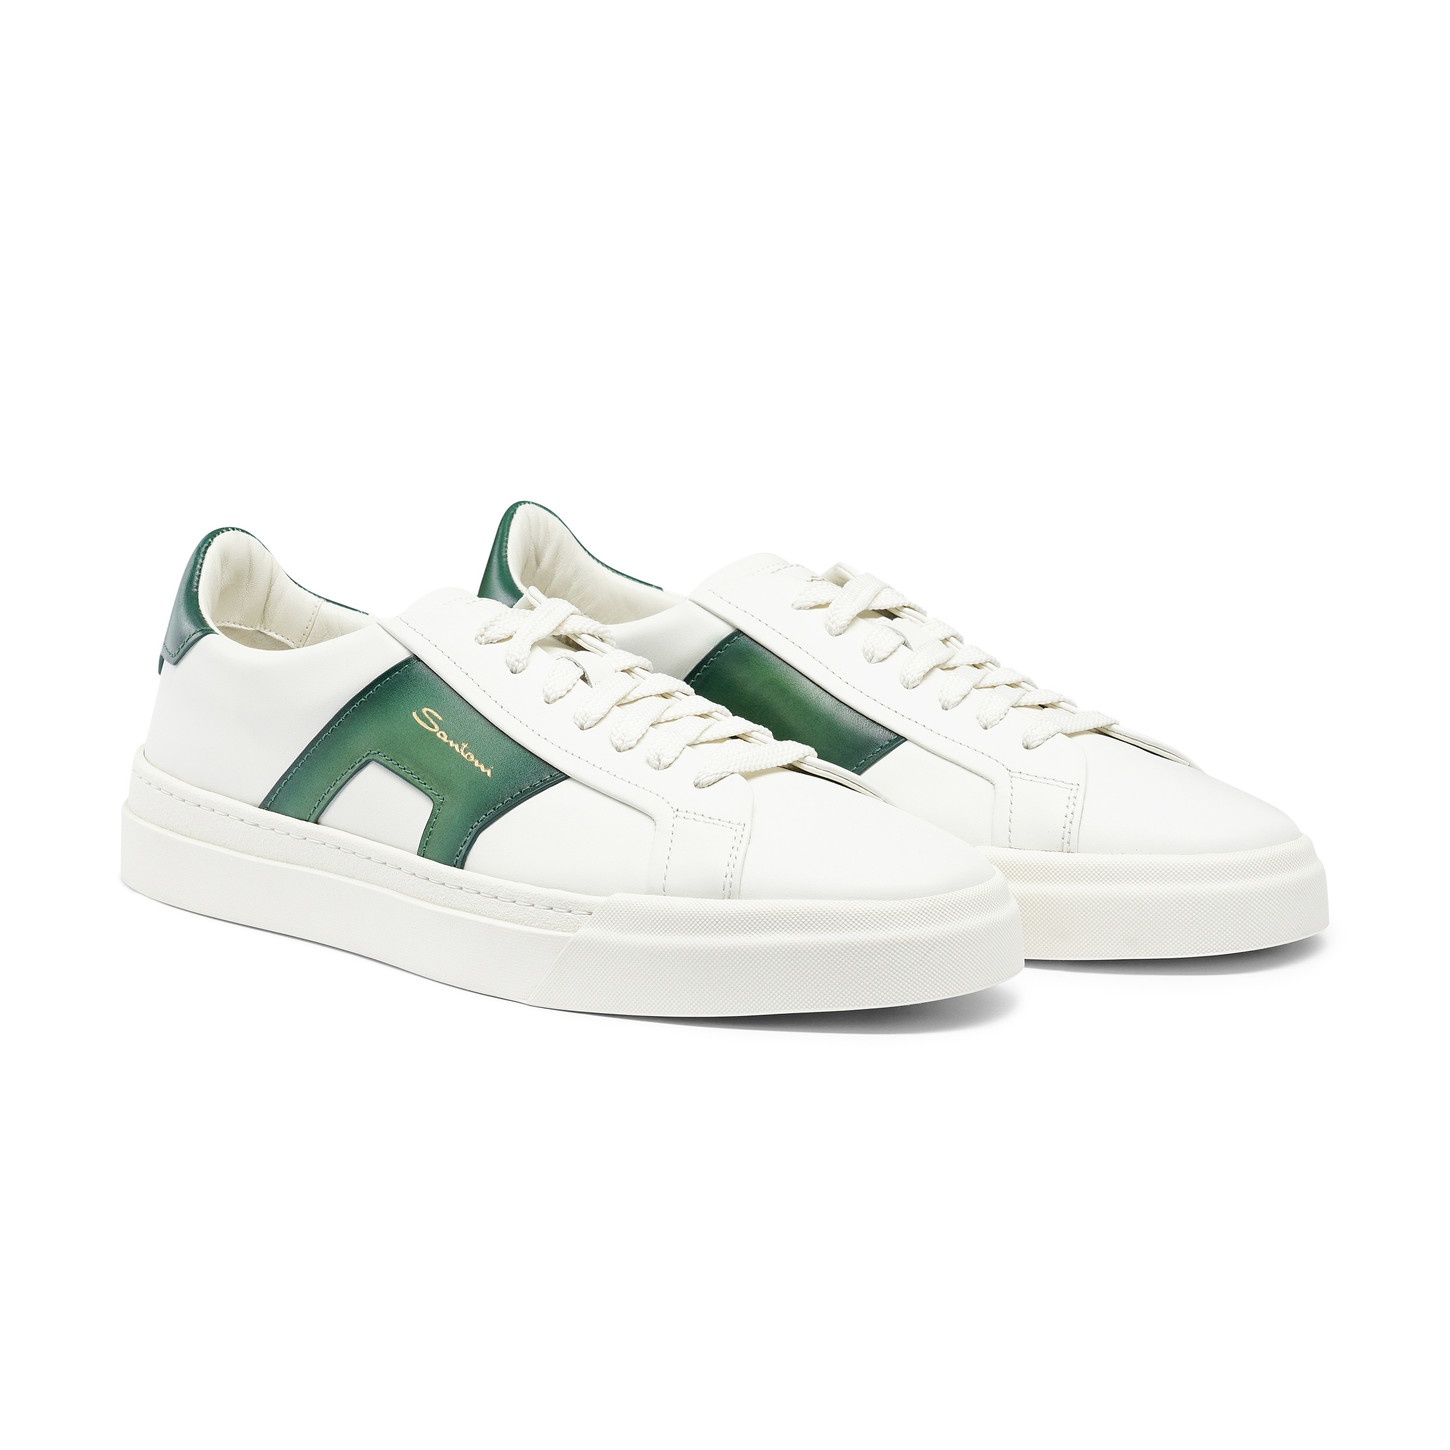 Men’s white and green leather double buckle sneaker - 3